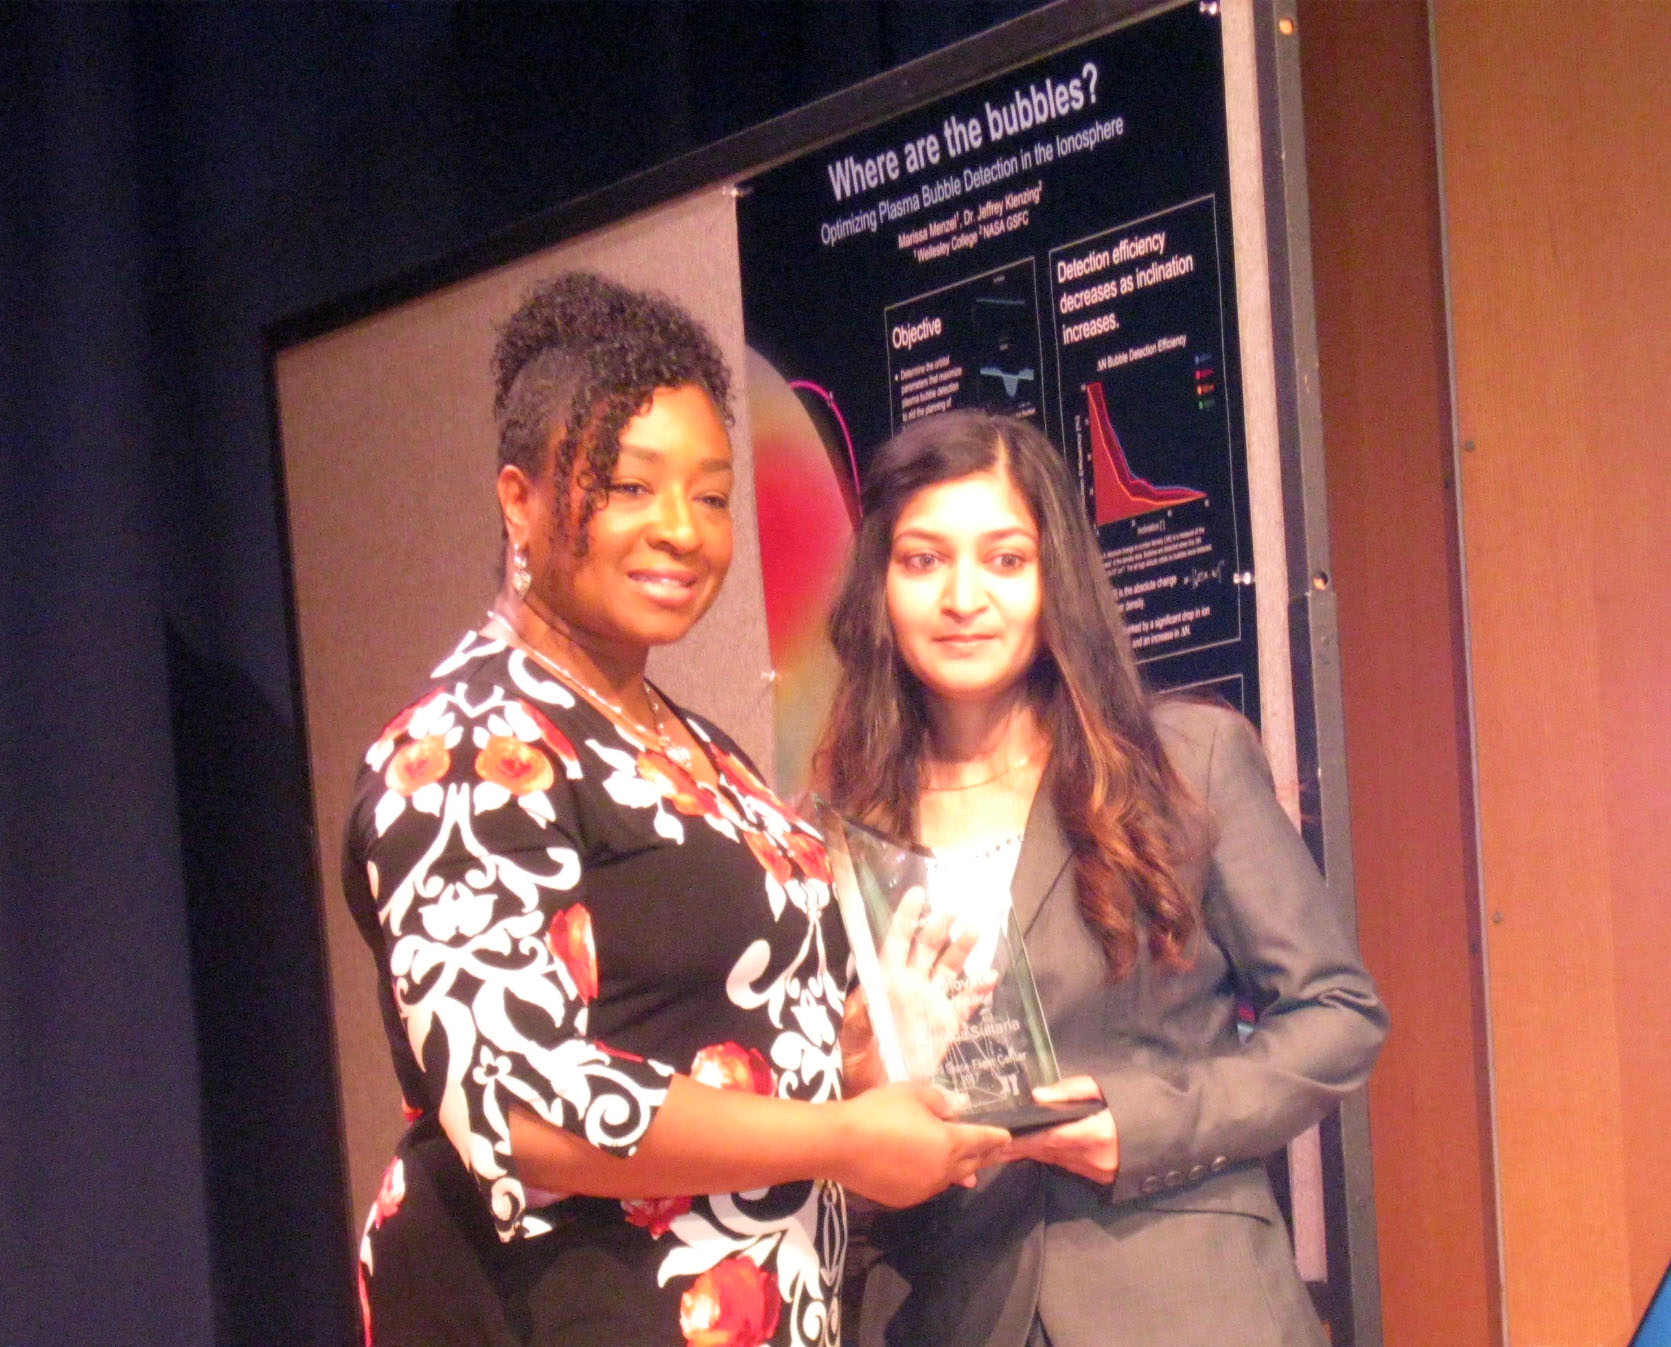 A woman with dark tan skin, brown, curled hair wearing a grey blazer holds an award that she's being presented by the woman standing next to her who has brown skin, black curly hair worn up, and is wearing a black, red, and white dress. They are standing in front of a poster that says "Where are the bubbles?"